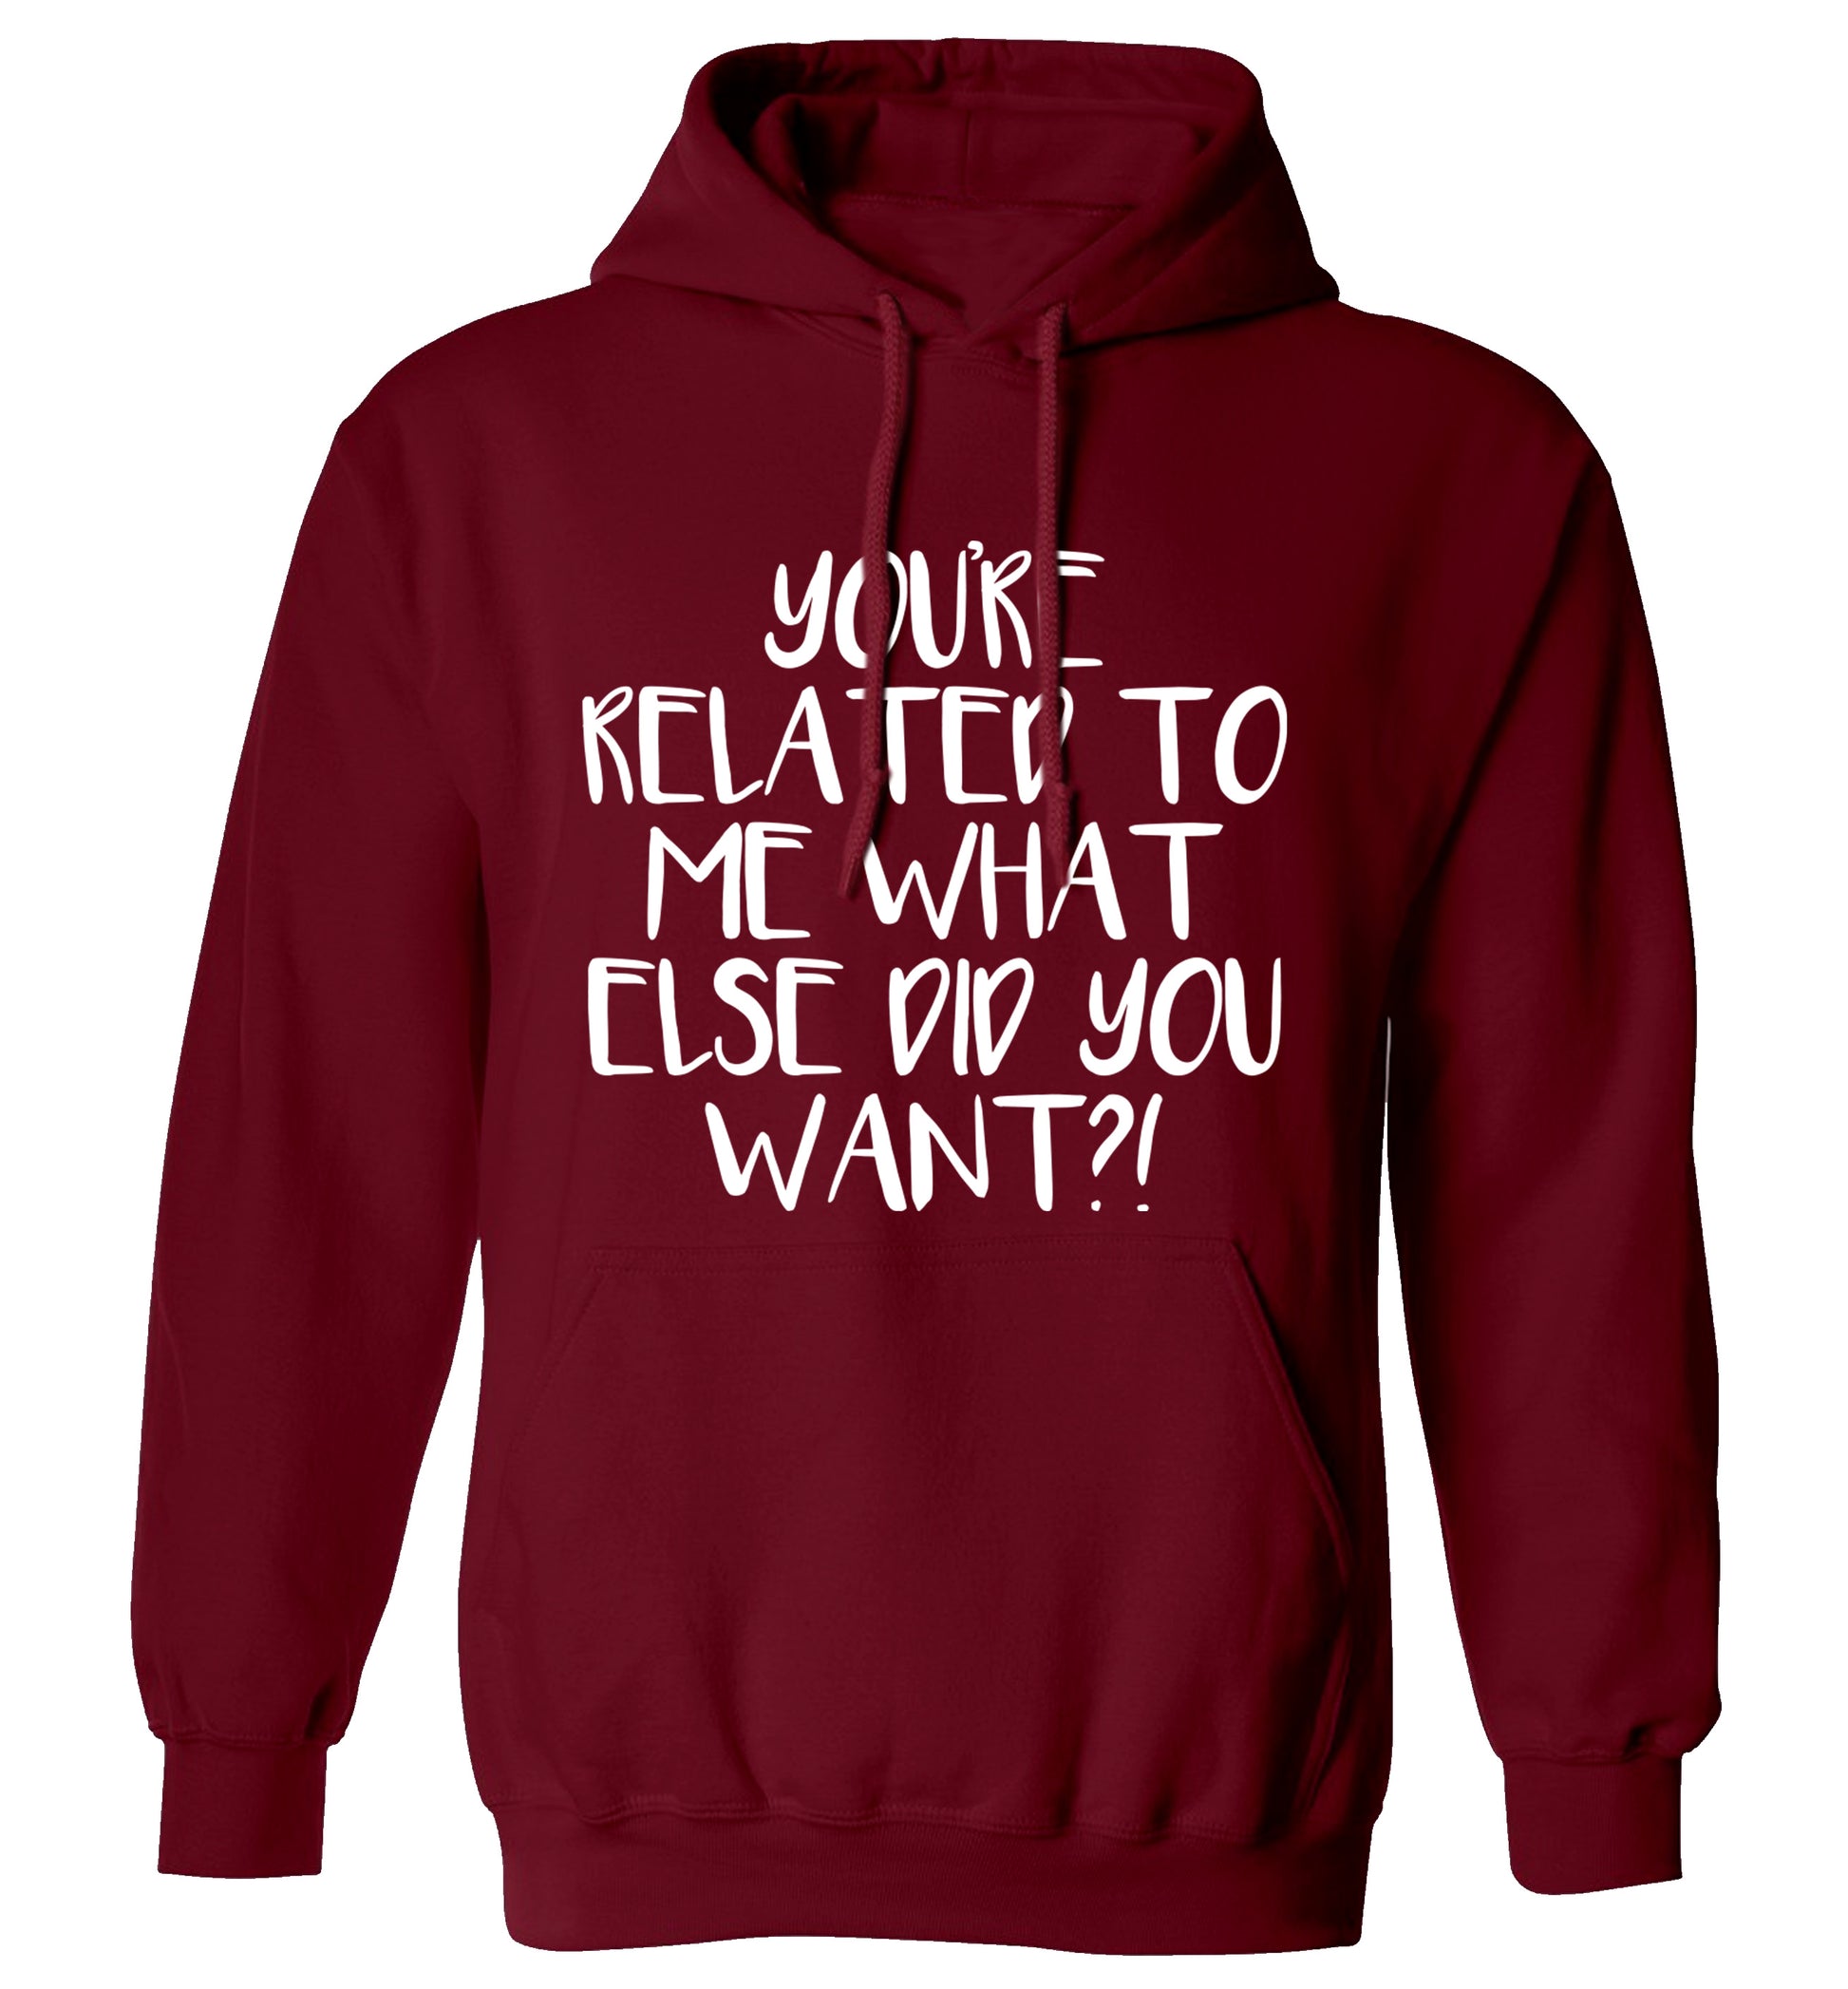 You're related to me what more do you want? adults unisex maroon hoodie 2XL